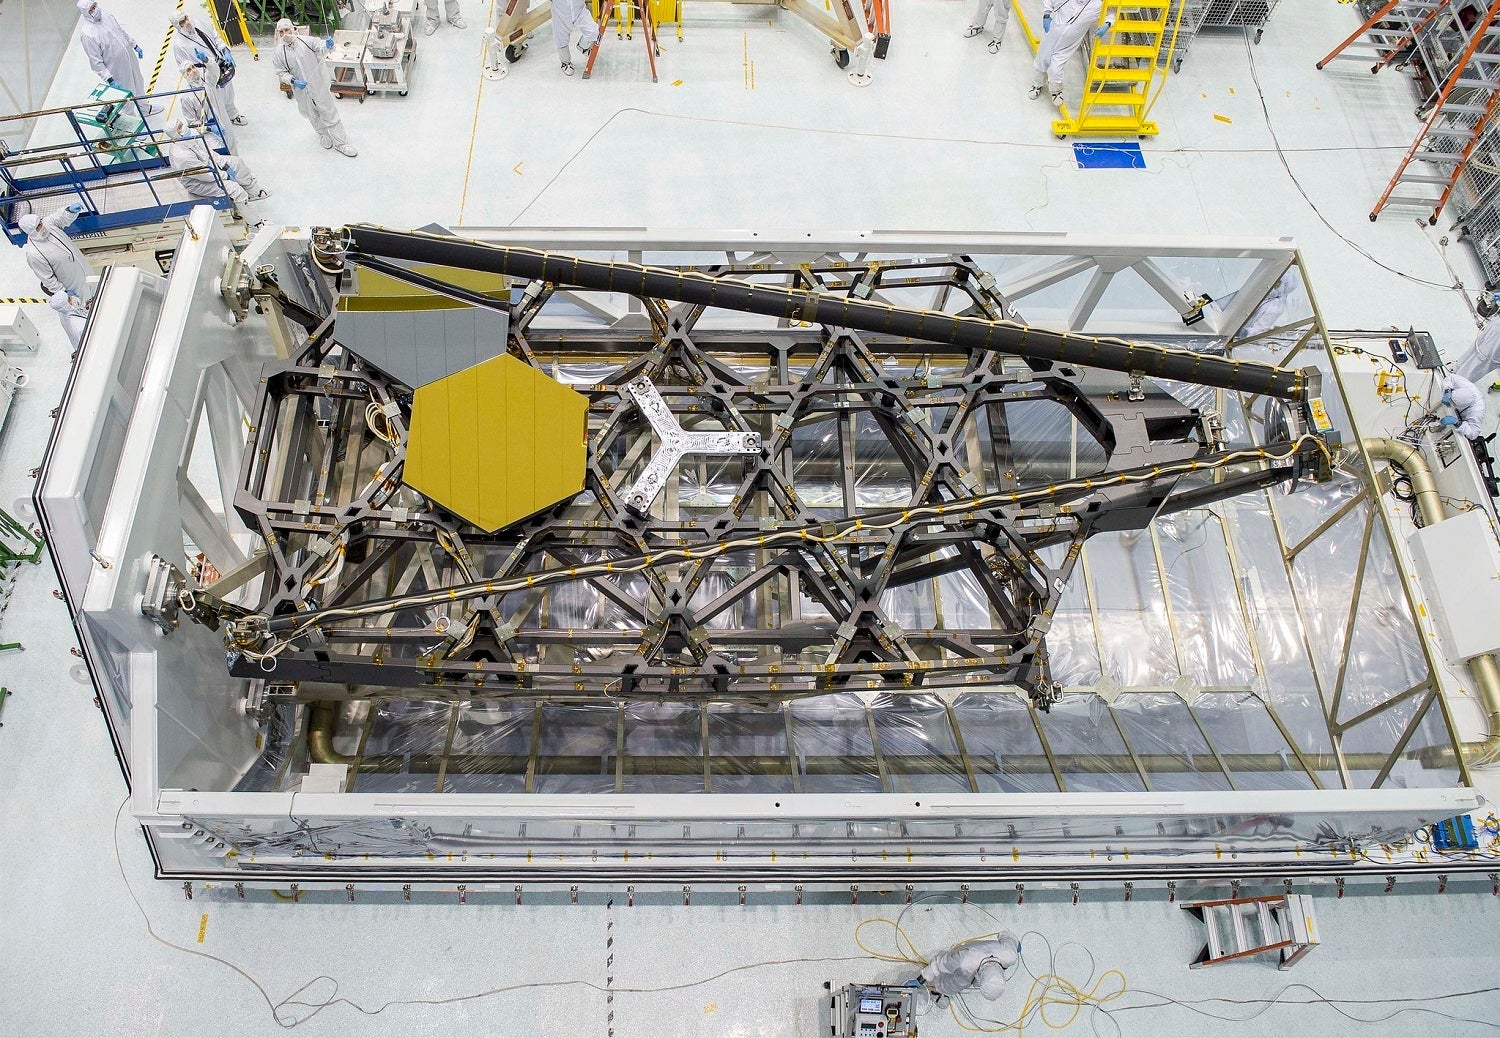 A bird’s-eye view of NASA Goddard’s cleanroom and the James Webb Space Telescope’s test backplane and mirrors sitting in their packing case.